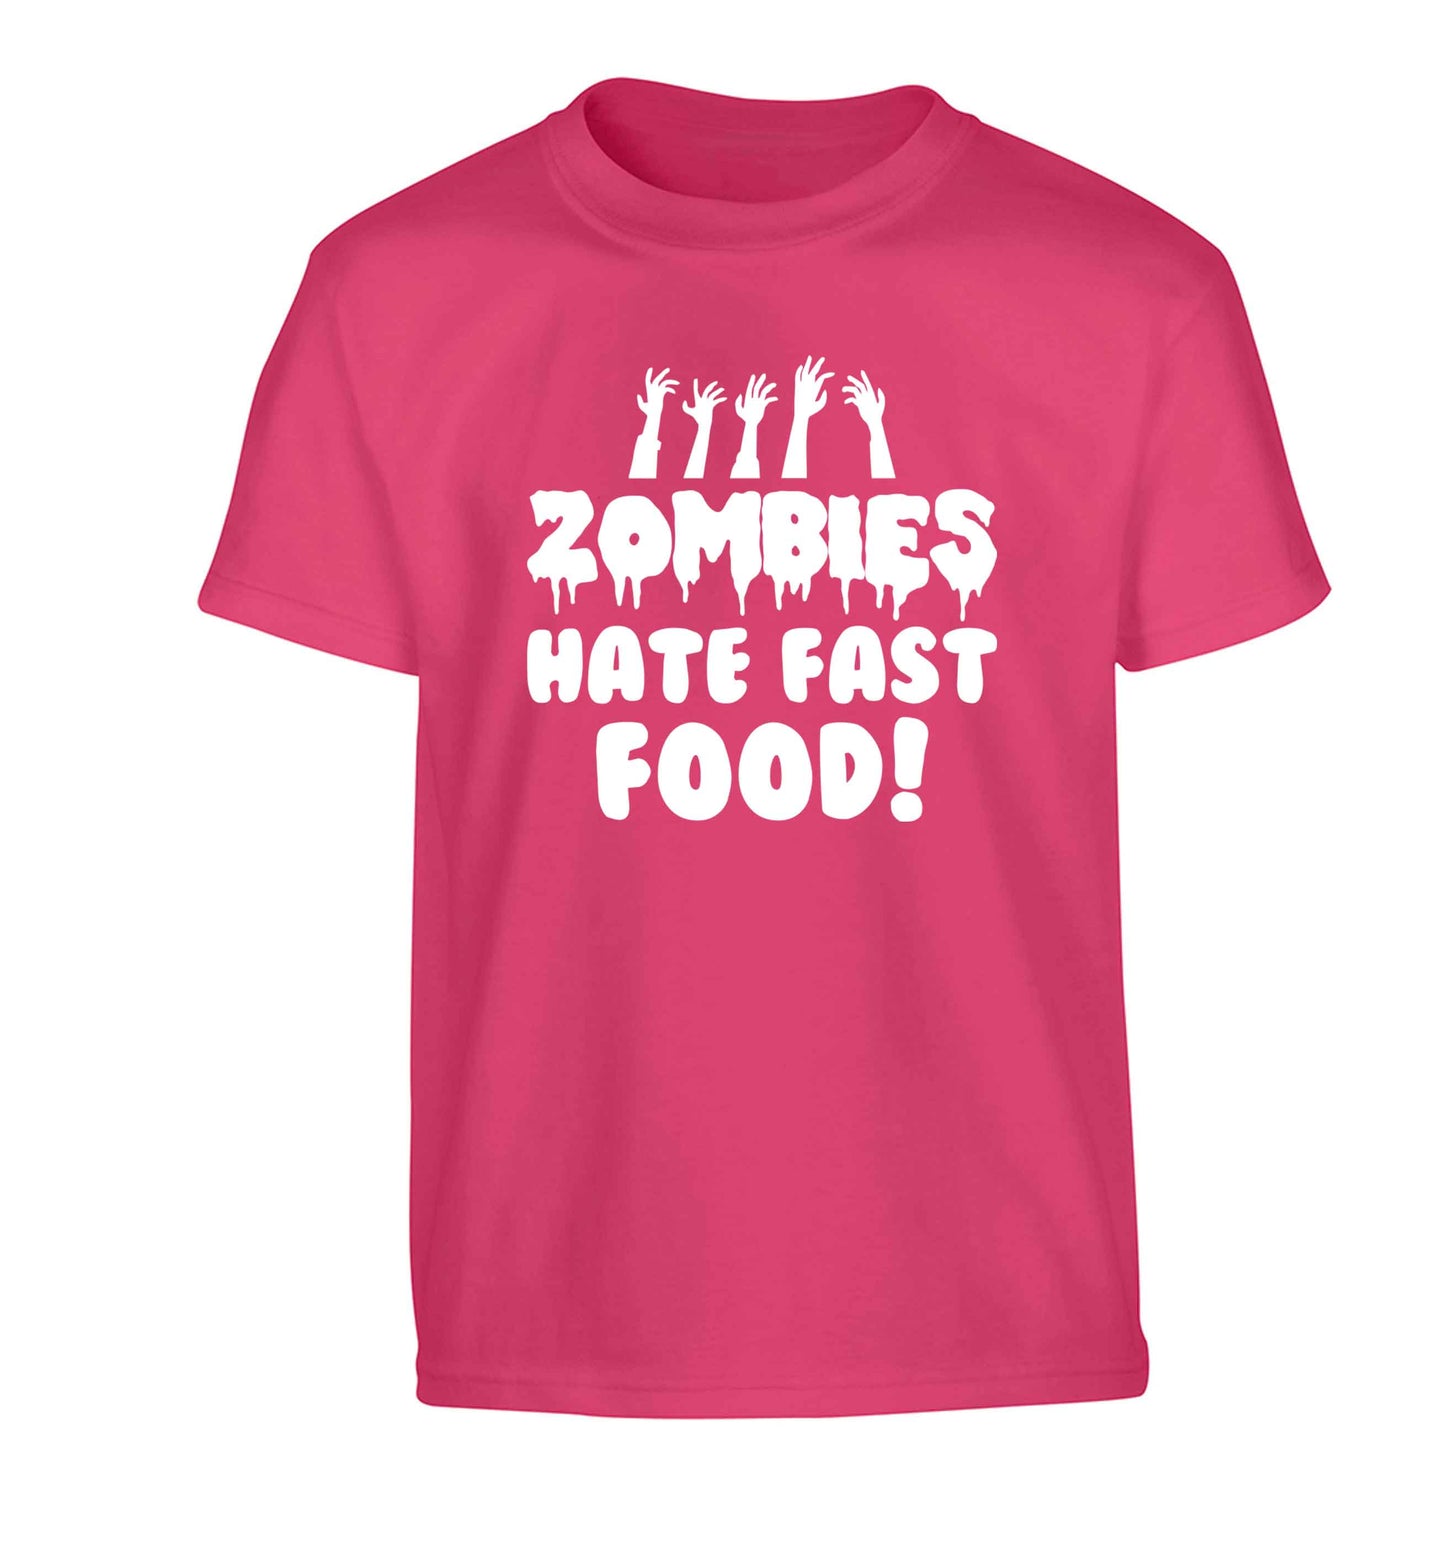 Zombies hate fast food Children's pink Tshirt 12-13 Years